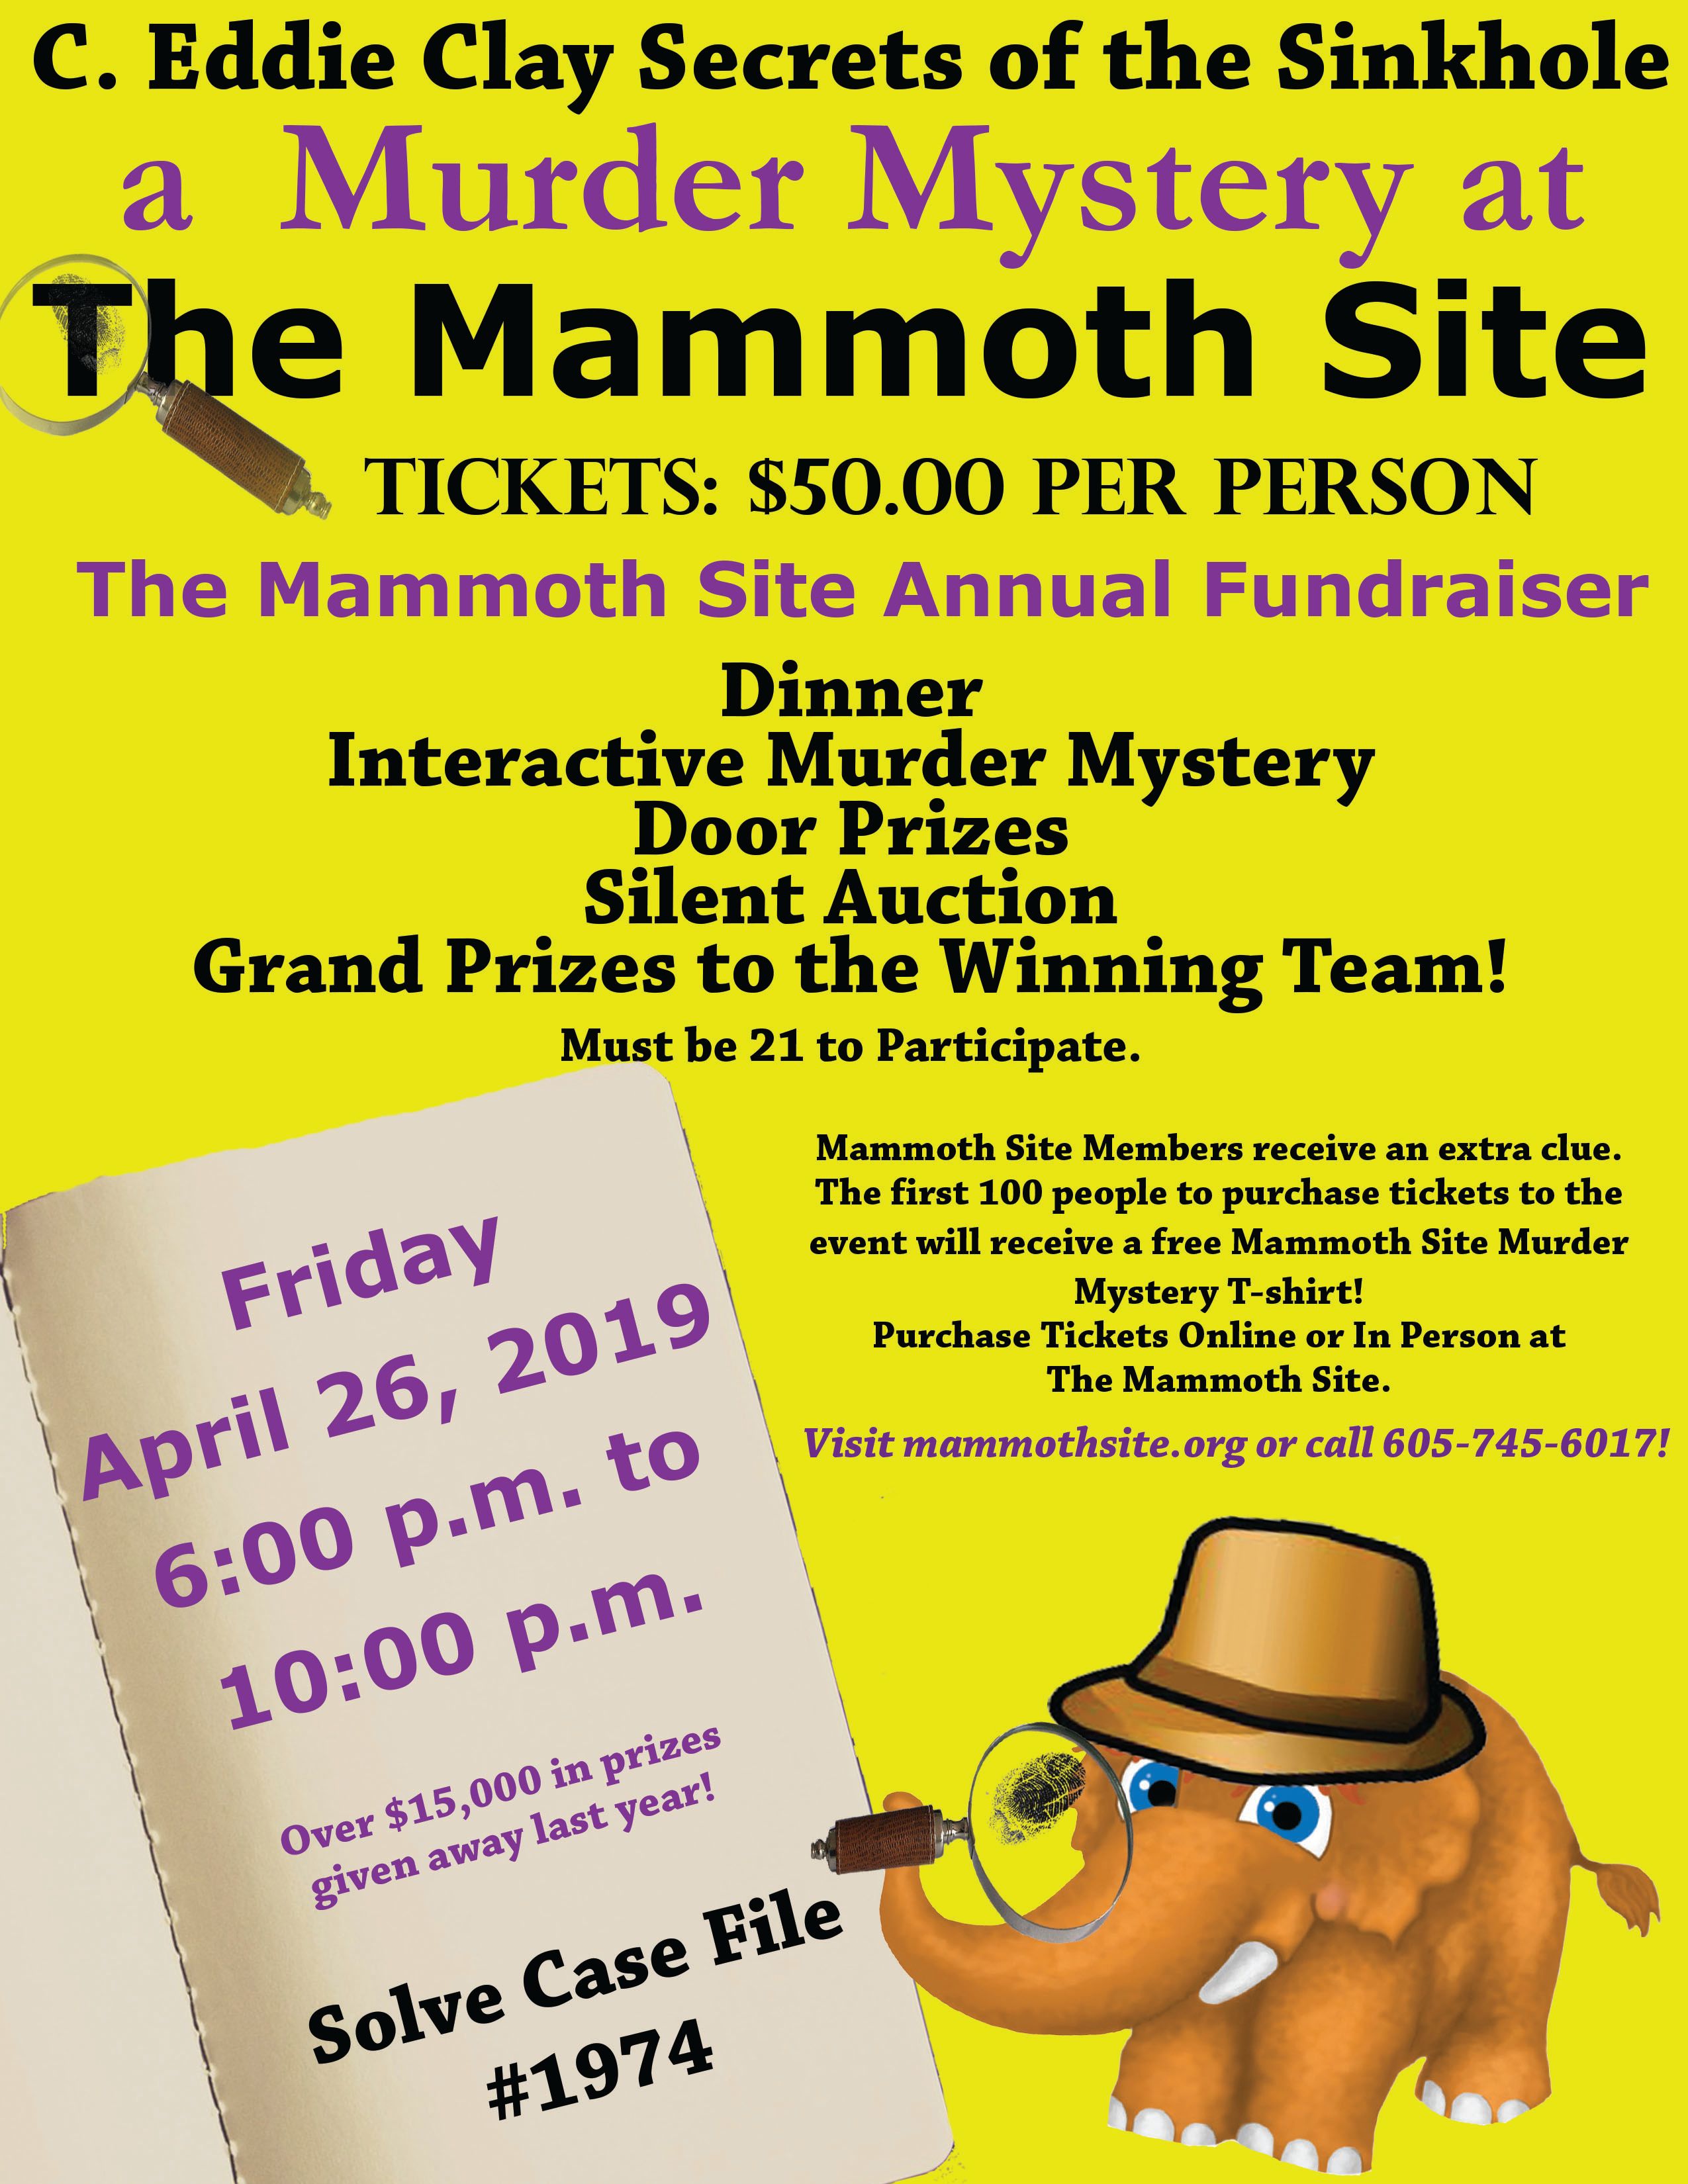 Eddie Clay Legacy “Secrets of the Sinkhole” Murder Mystery at  The Mammoth Site